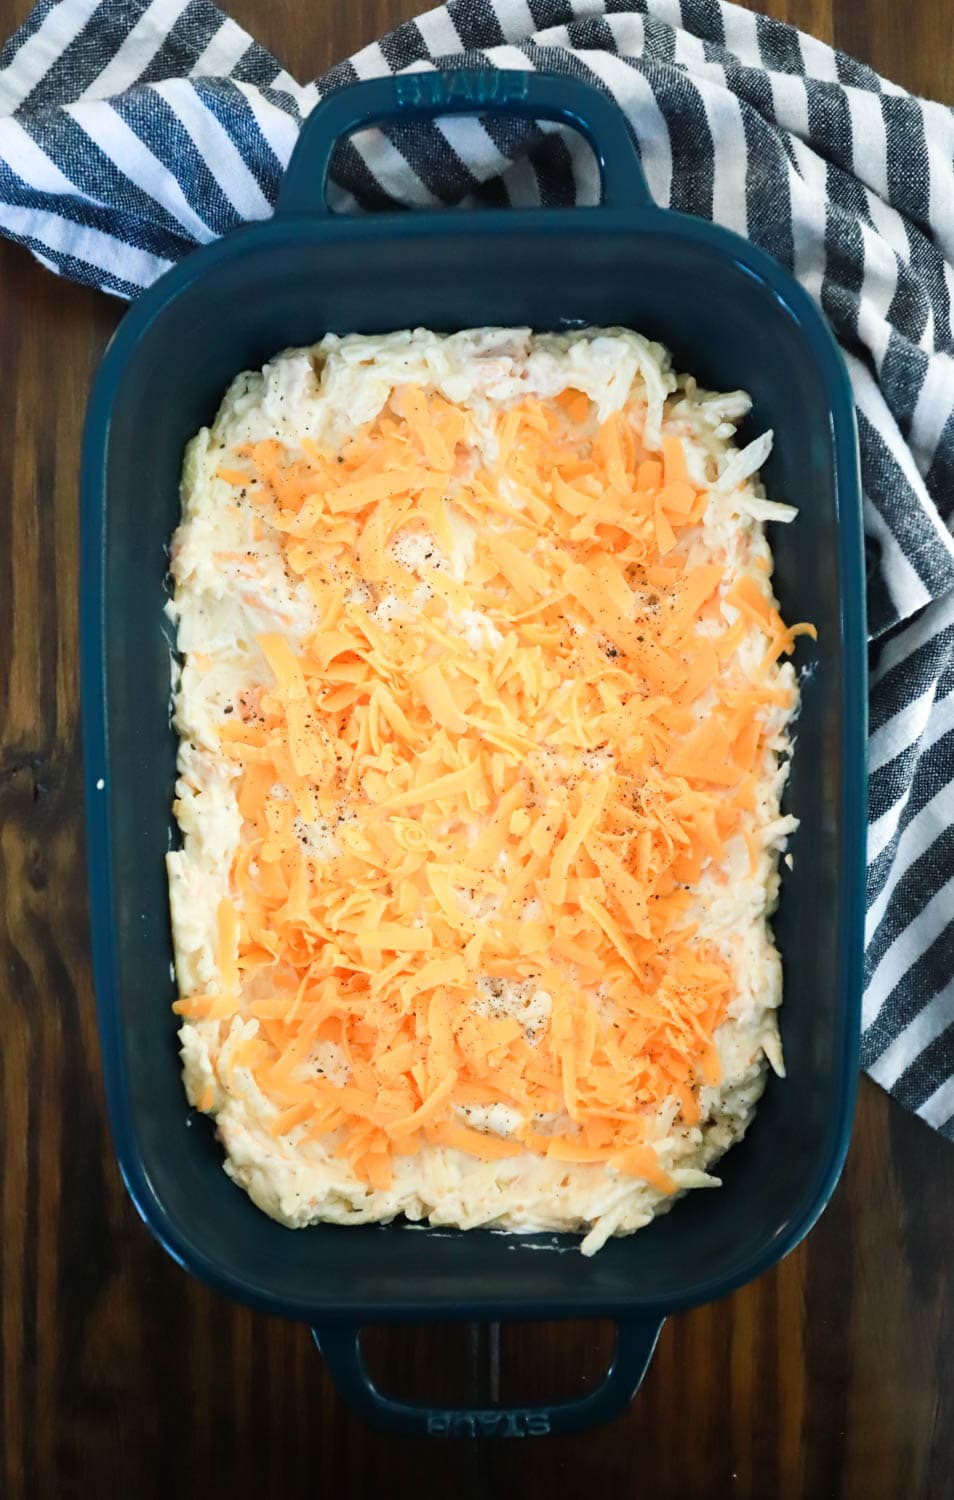 unbaked hashbrown casserole topped with cheese in dark green baking dish with striped napkin.